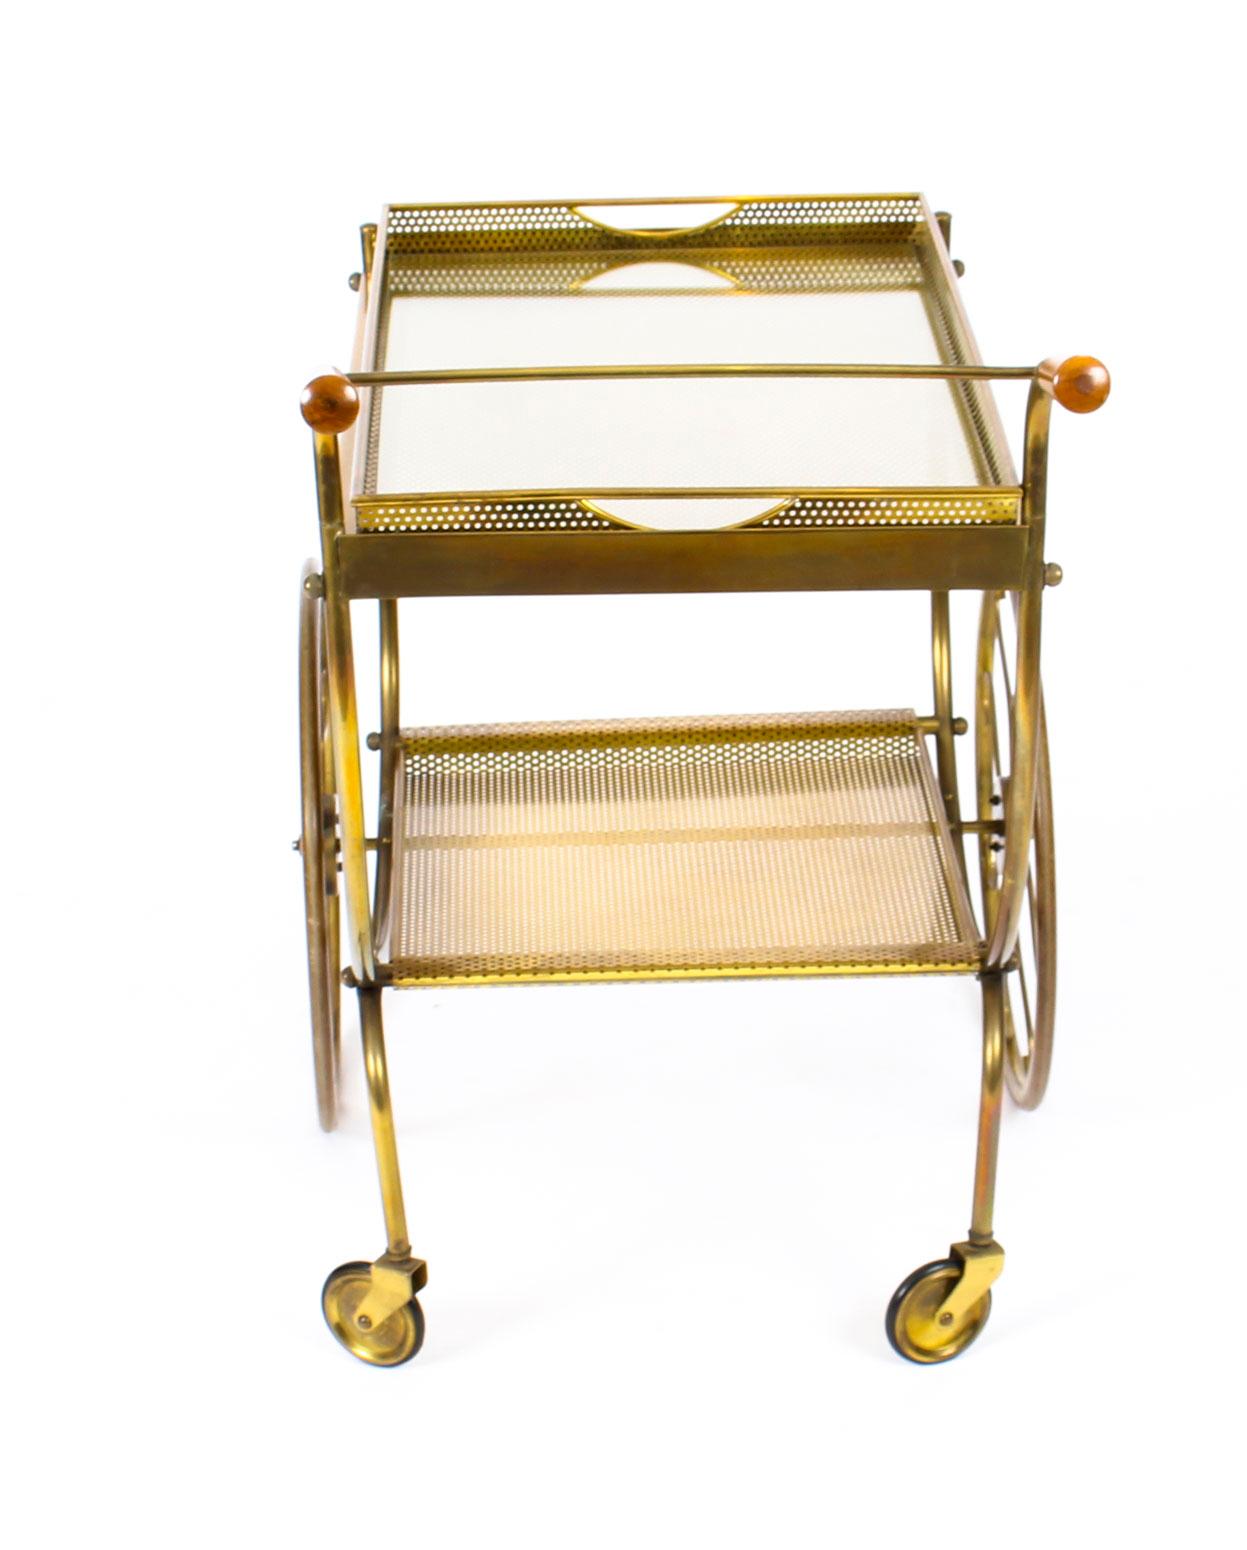 Antique French Modernist Gilded Drinks Serving Trolley, Midcentury 5